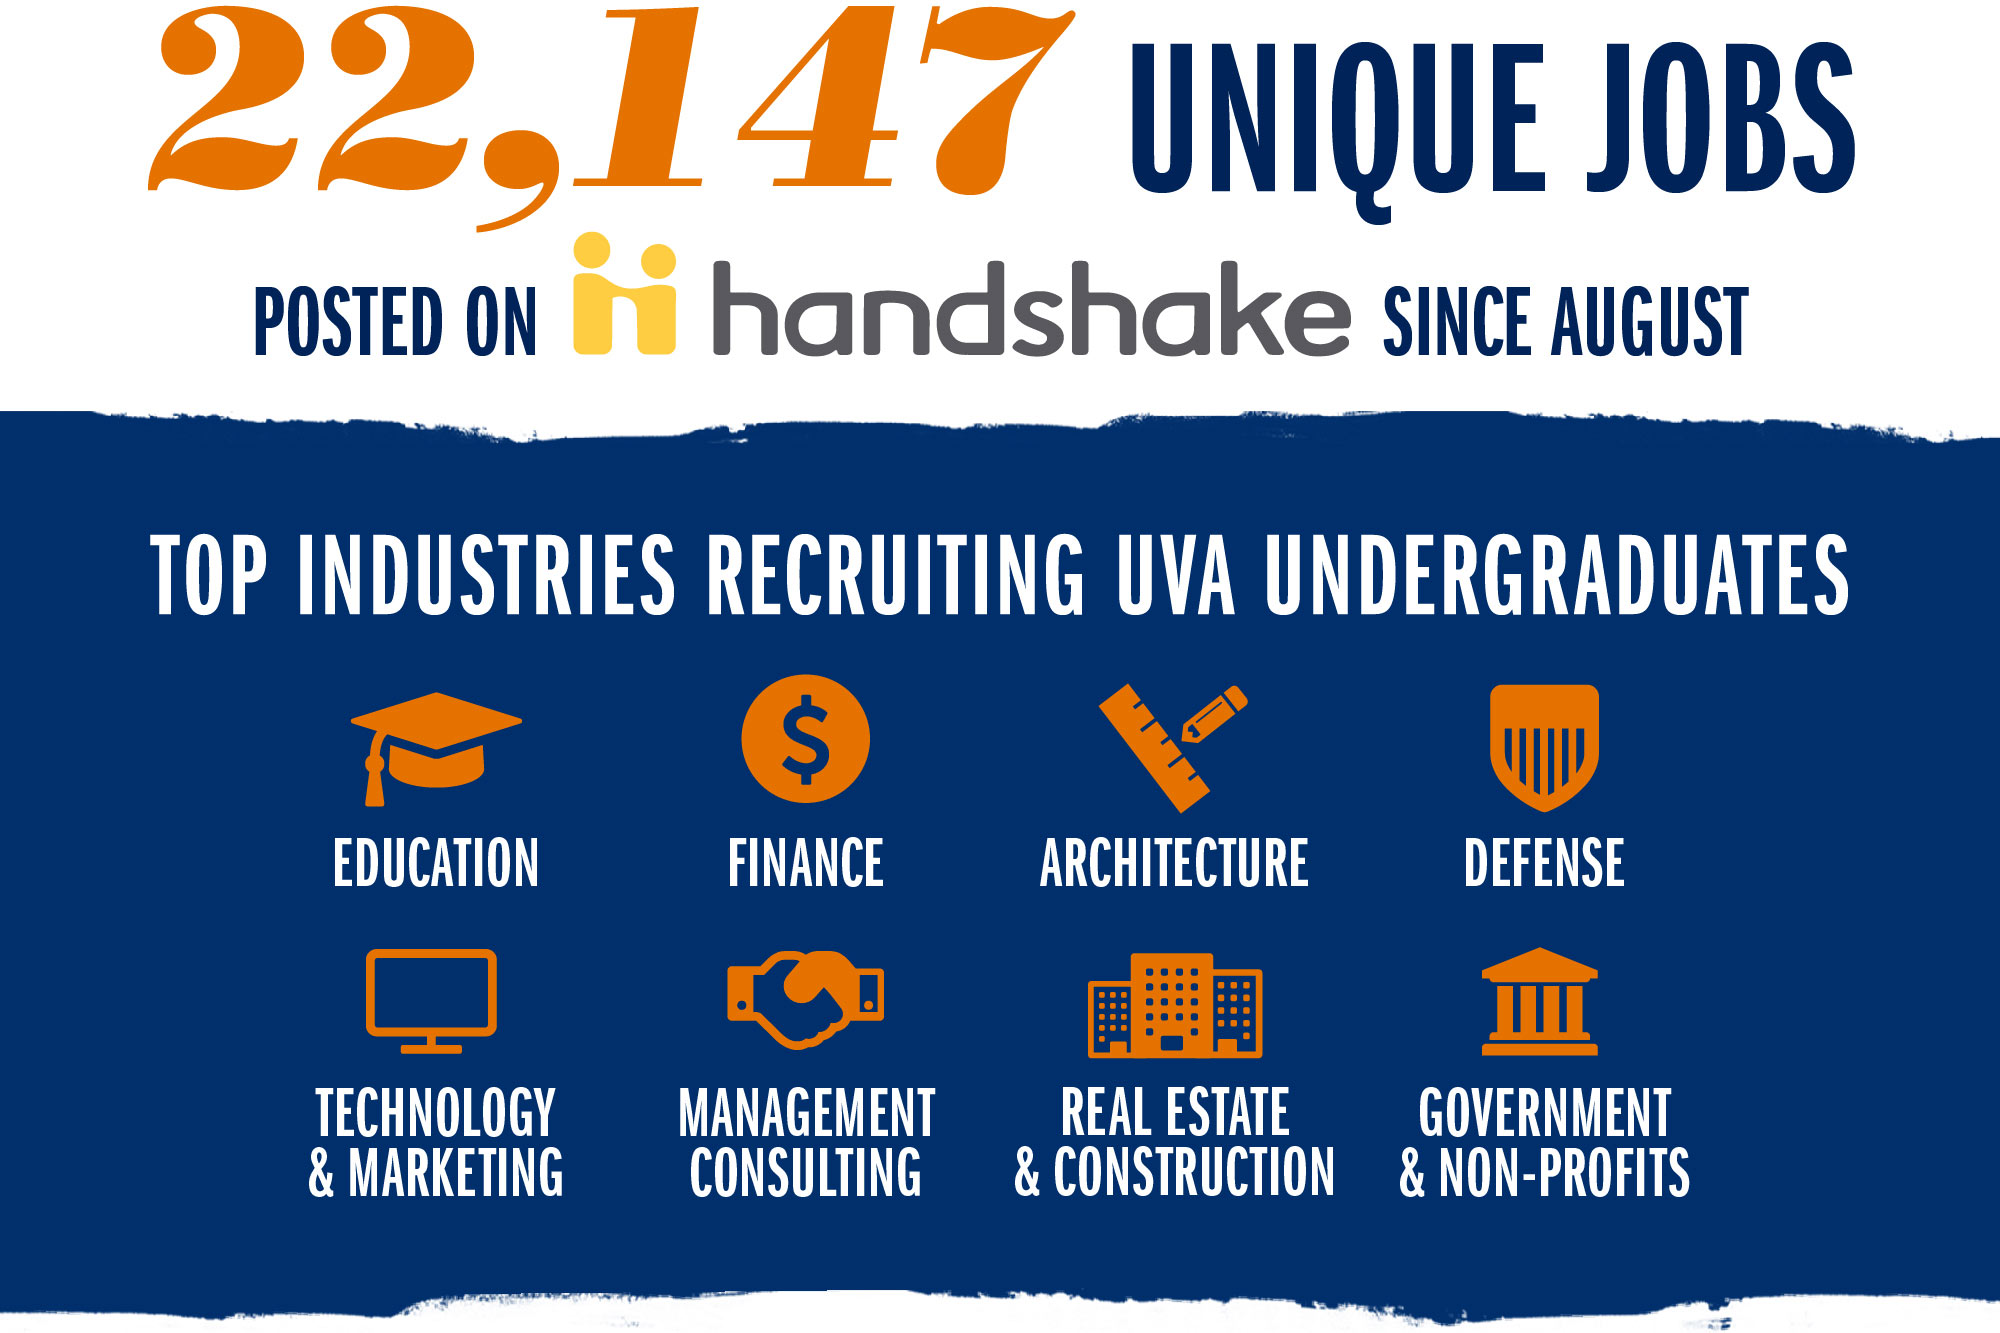 text reads: 22,147 unique jobs posted on handshake since august.  Top industries recruiting UVA undergraduates: education, finance, architecture, defense, technology & marketing, Management Consulting, Real Estate & construction, Government & non-profits